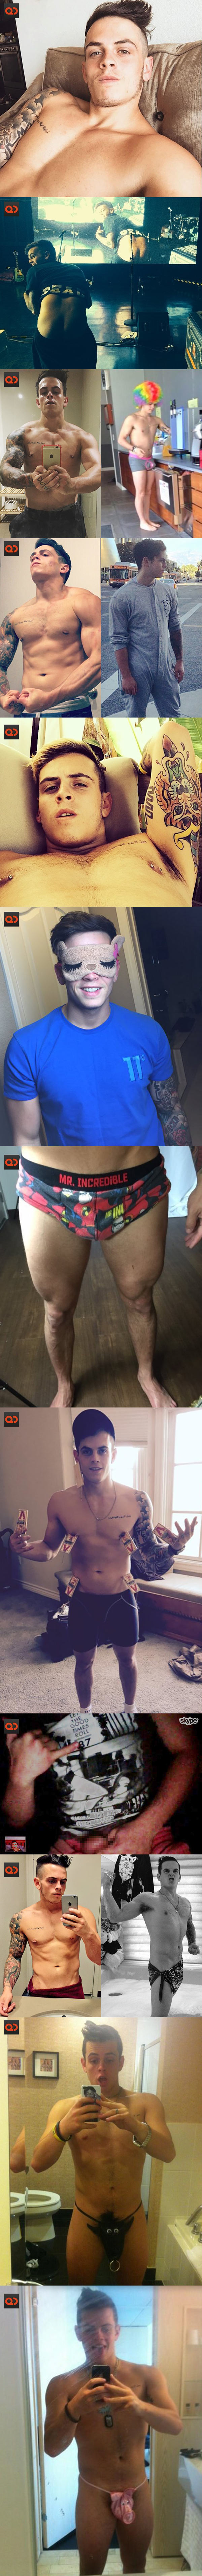 Daniel Sahyounie, From Aussie YT Comedy Group “The Janoskians”, Blurry Photo Of His Cock Find Its Way Online!